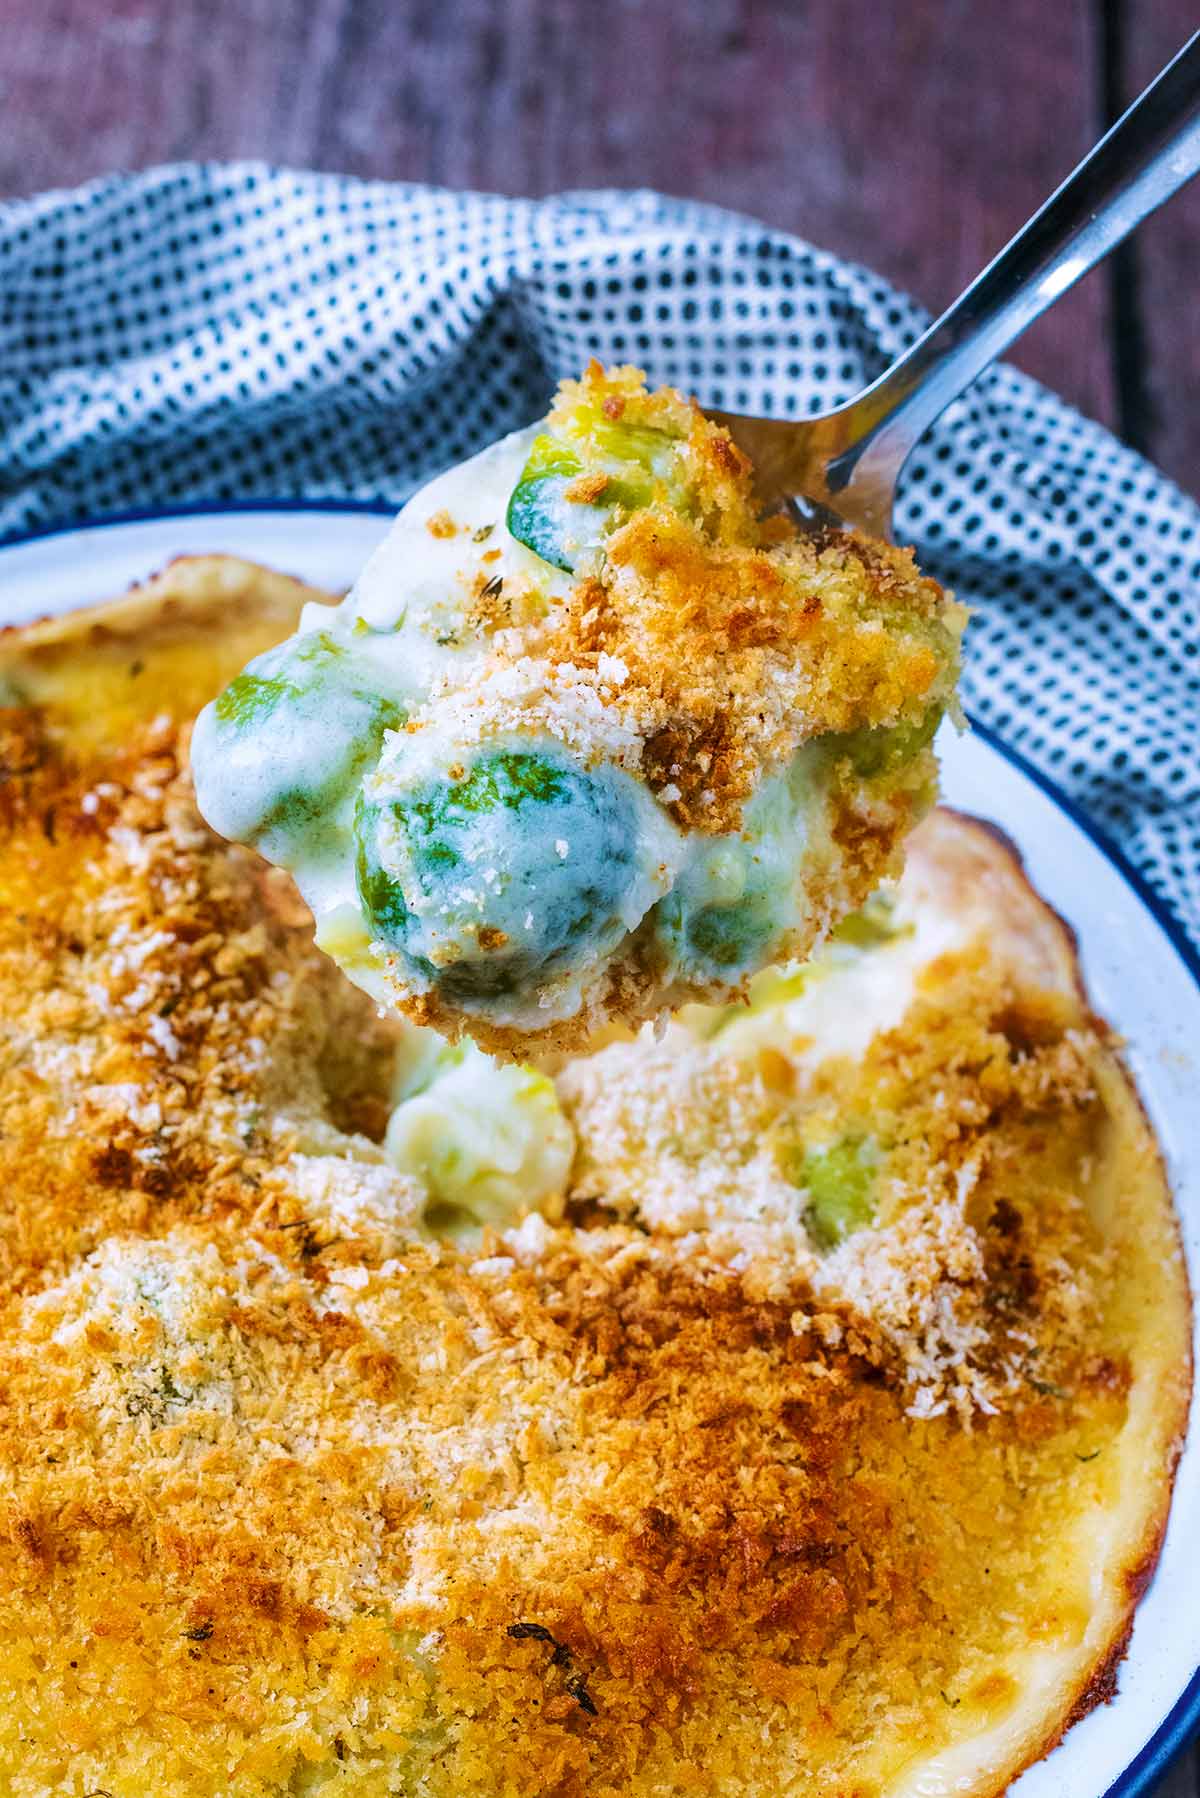 A spoon lifting up some sprout gratin from a dish.